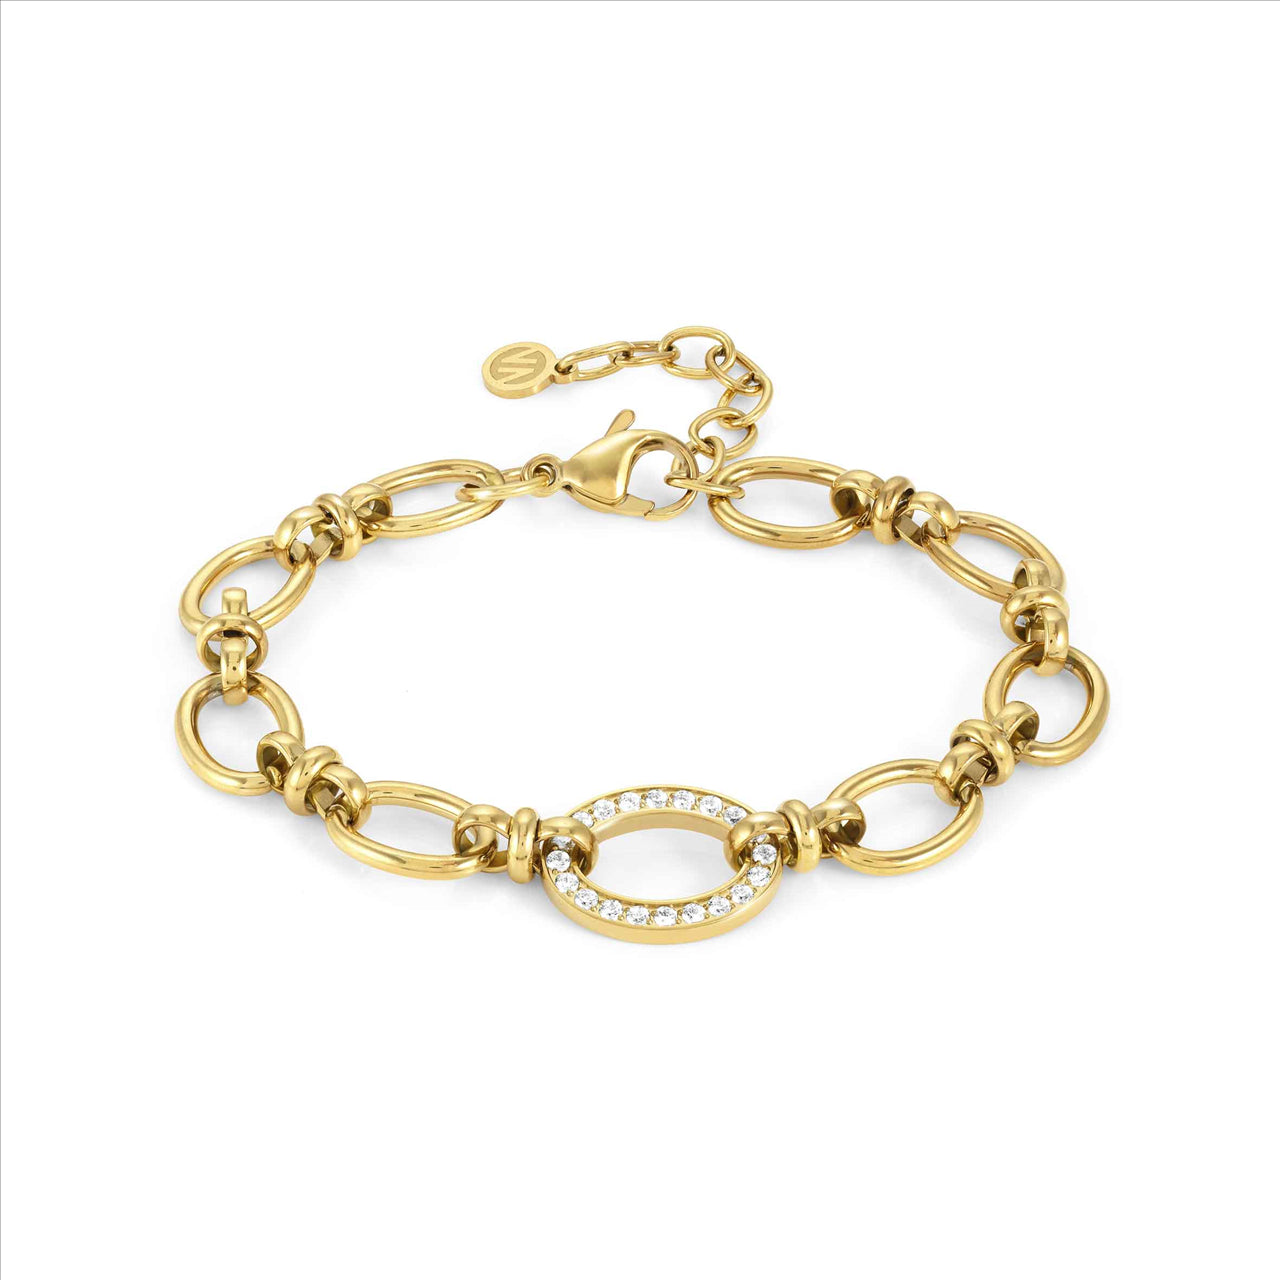 Affinity Gold PVD Chain Bracelet with CZ